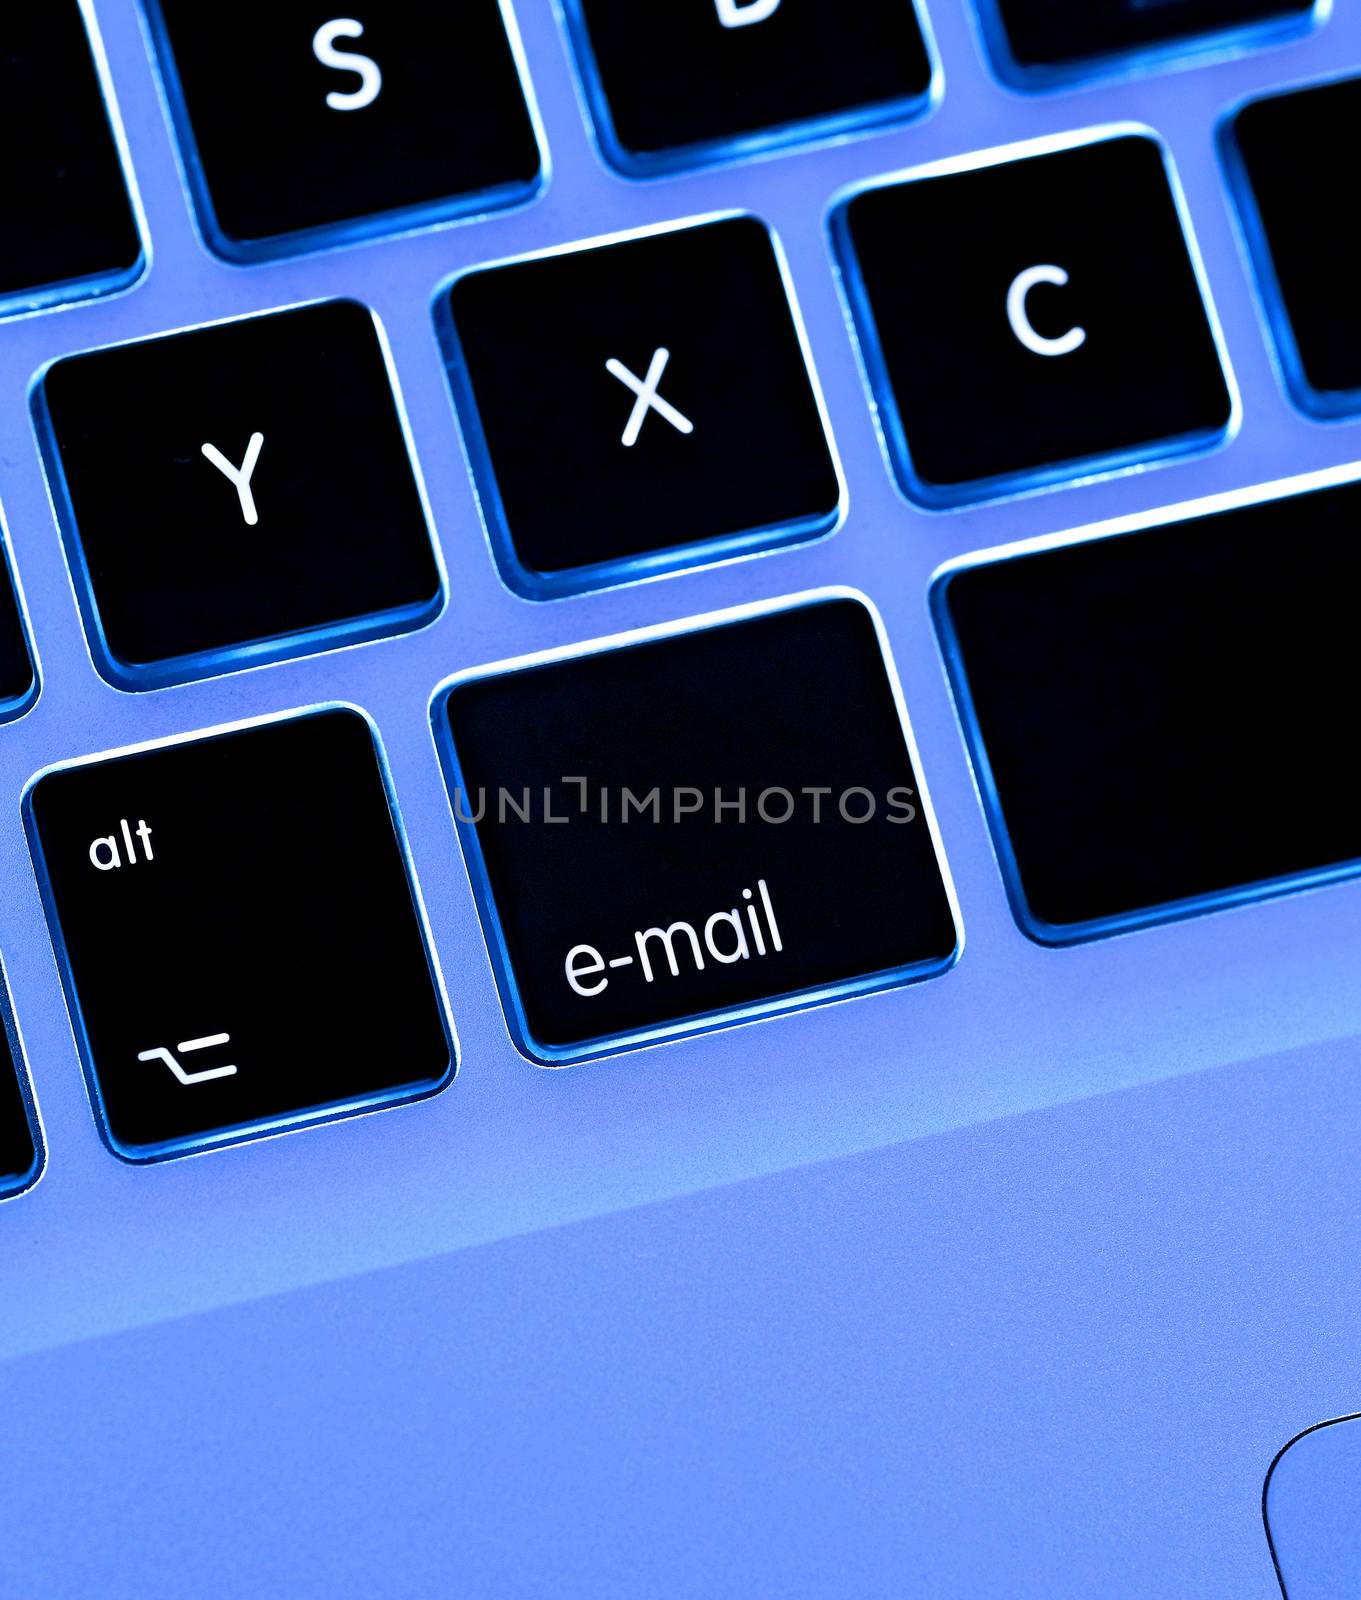 keyboard layout with e-mail key / button {super high resolution/shot with PhaseOne P45}